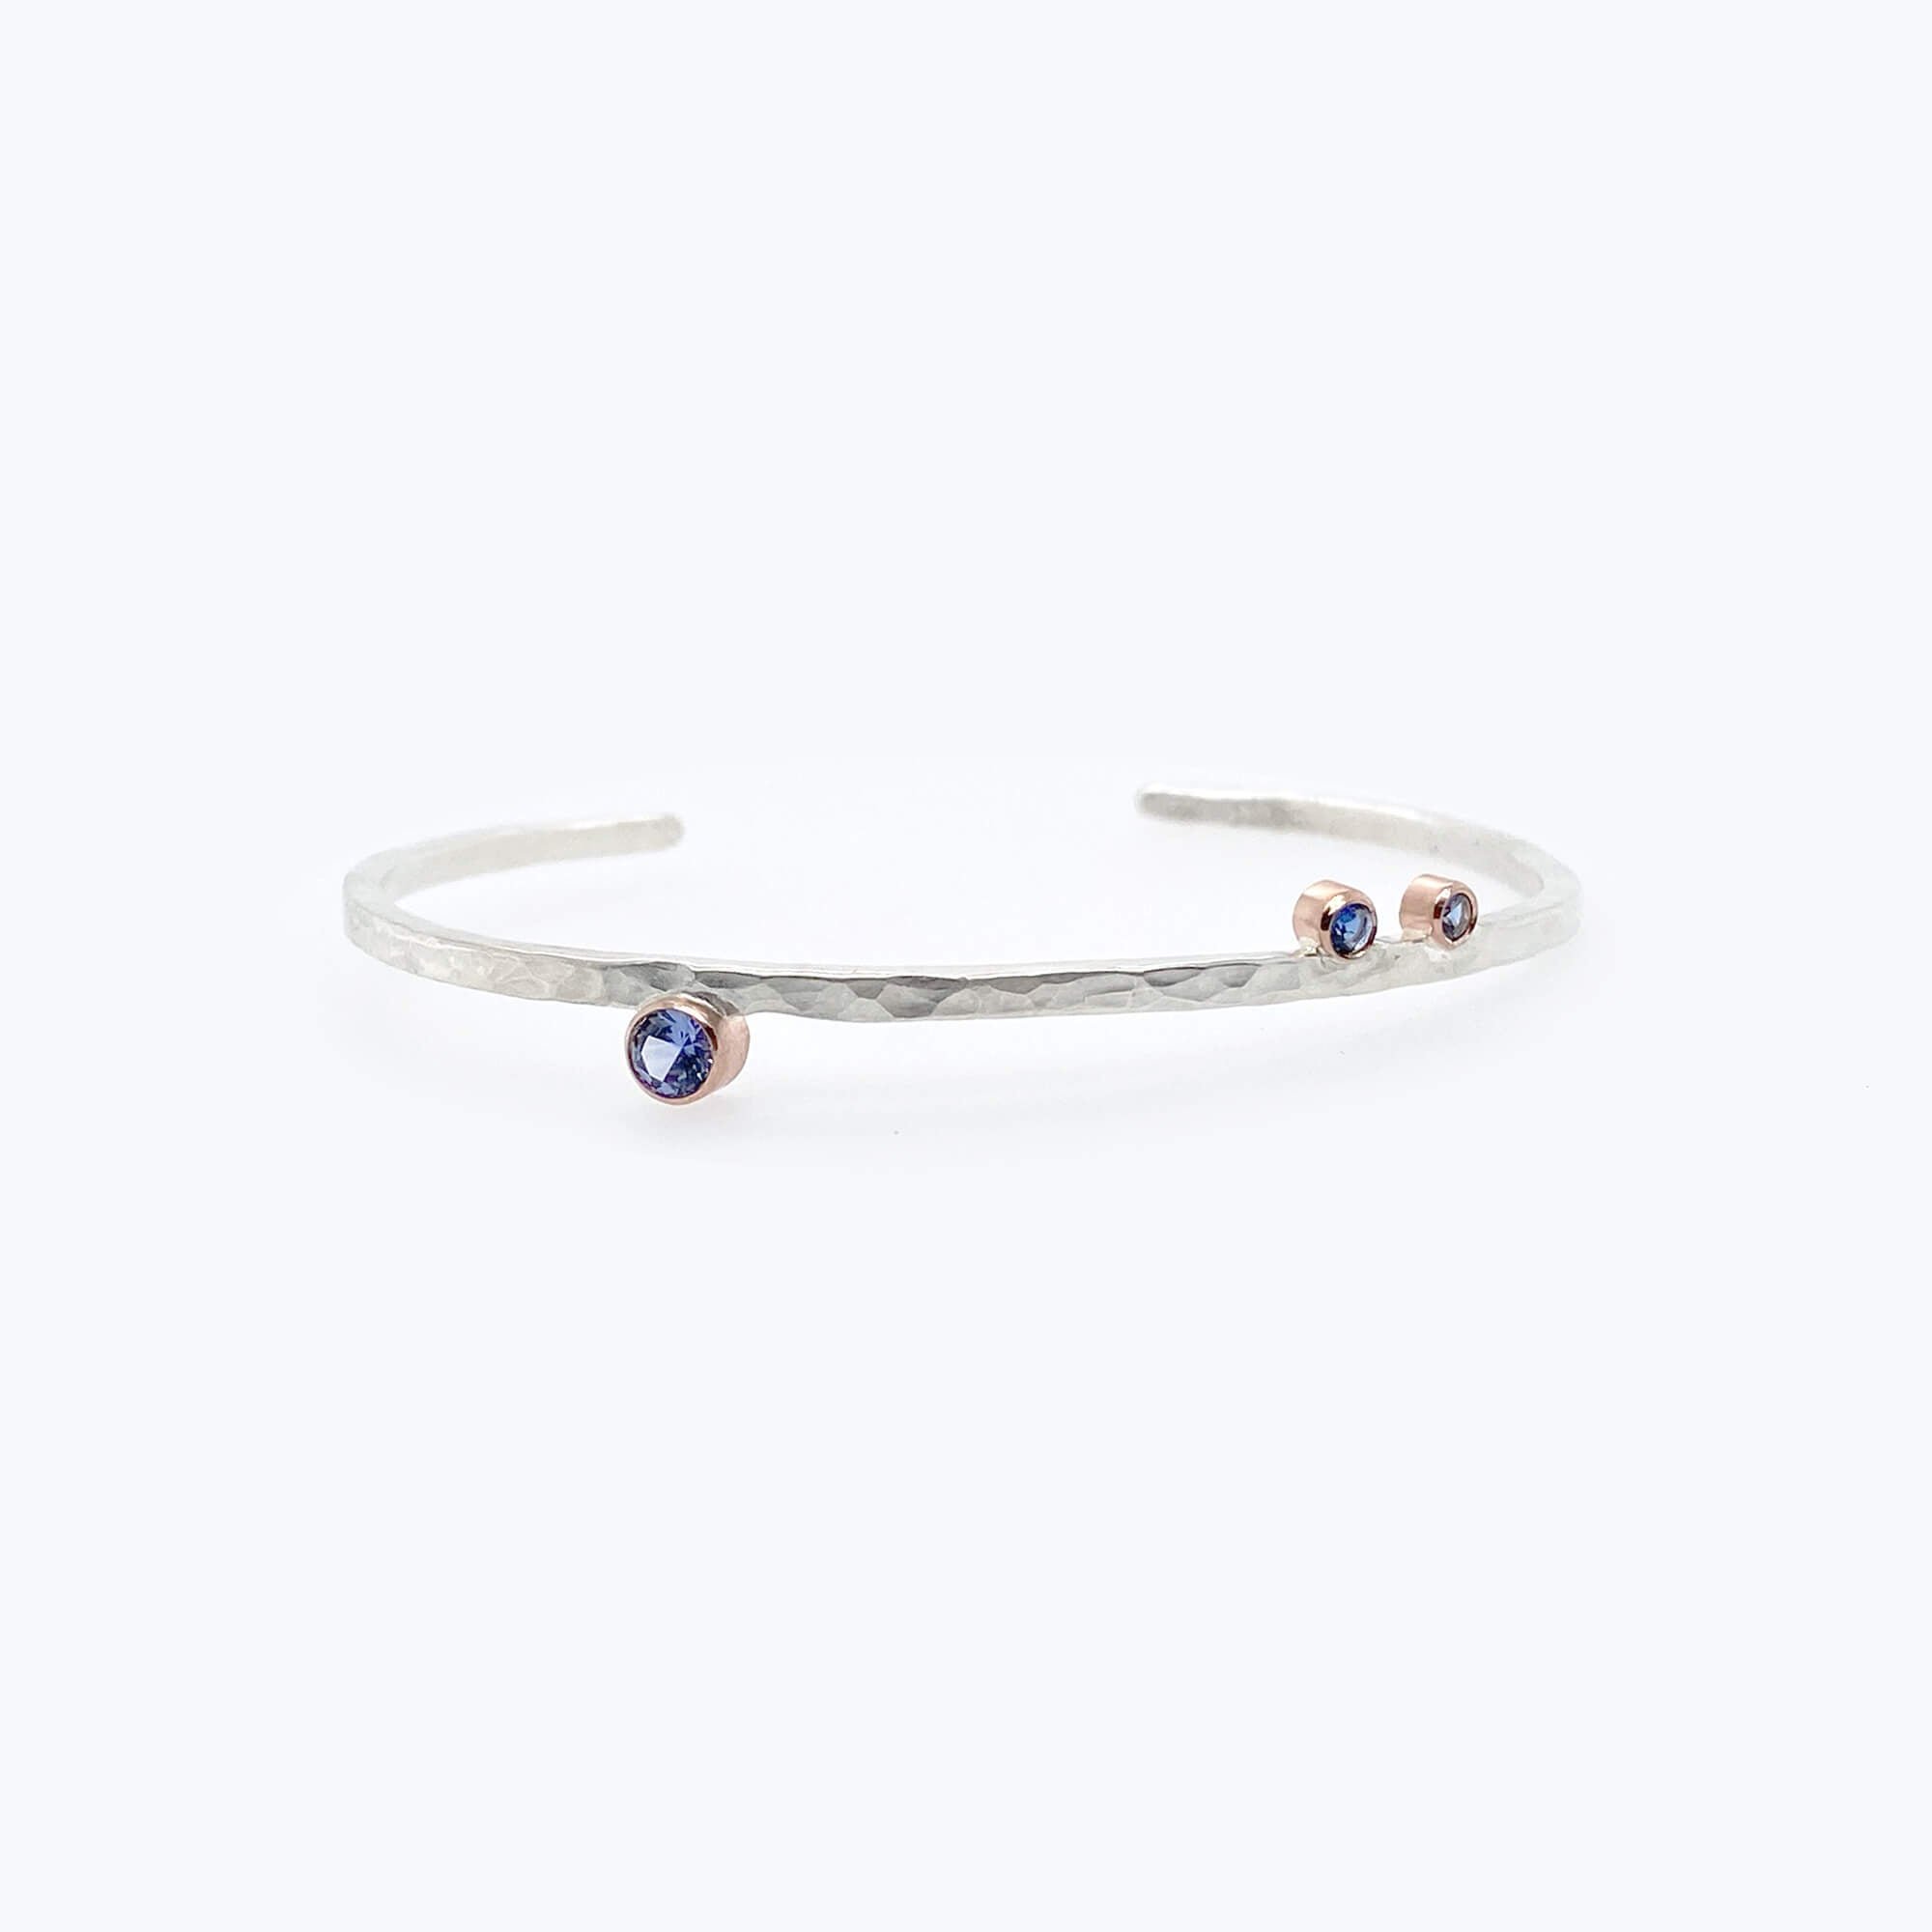 Sterling silver cuff with rose gold bezel set blue sapphires.